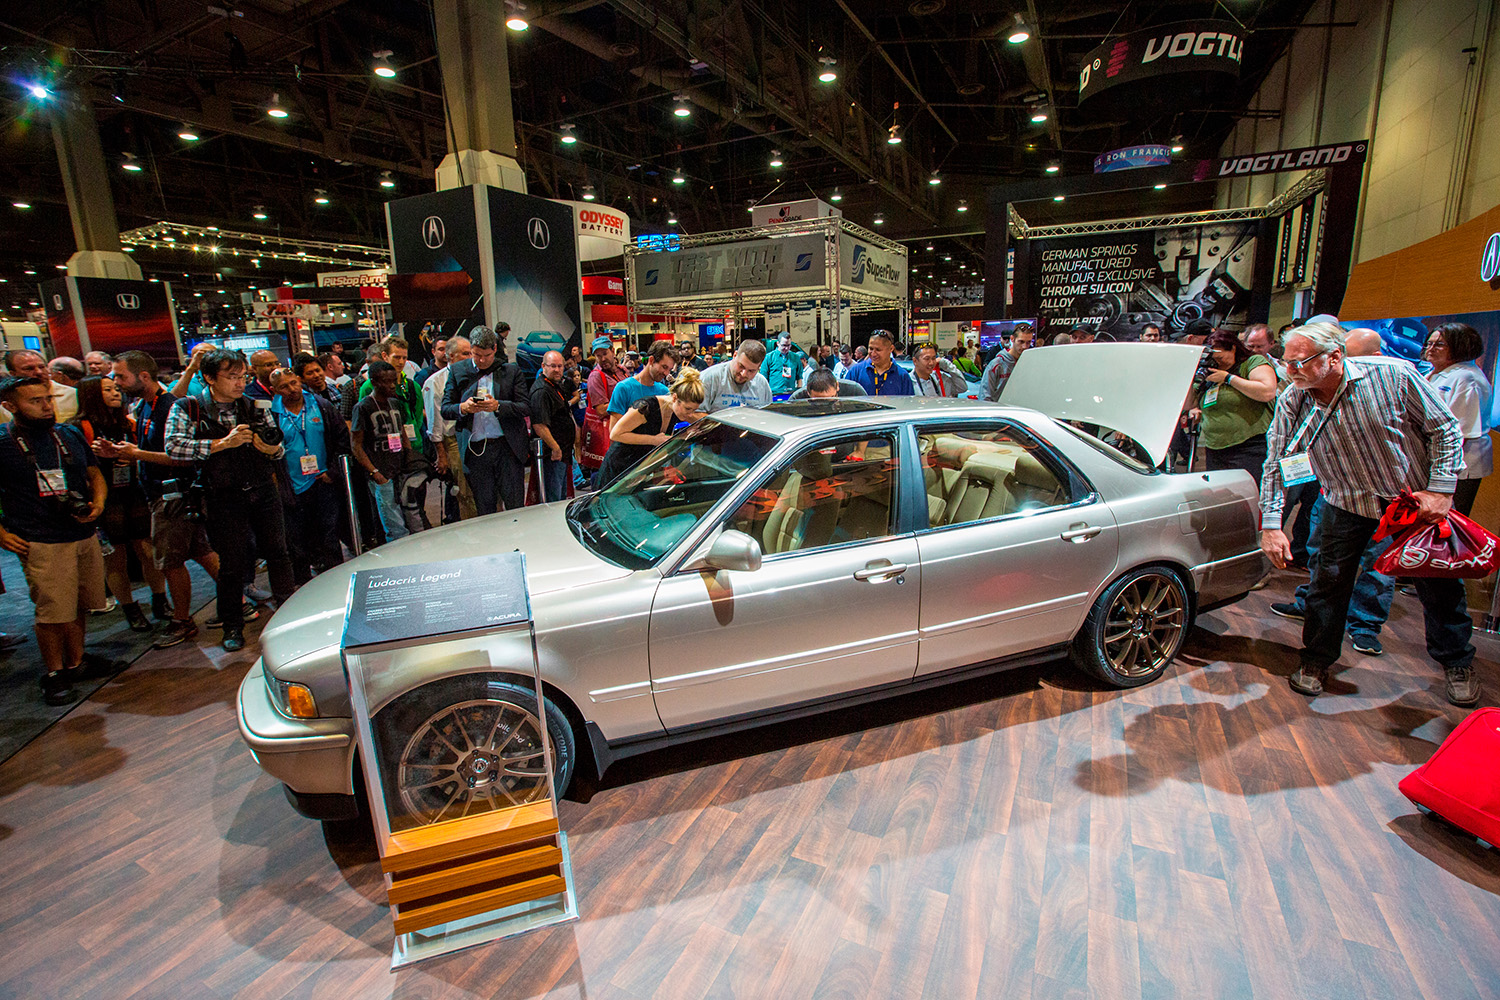 1993 Acura Legend that belongs to rapper Ludacris on display at SEMA show in 2015